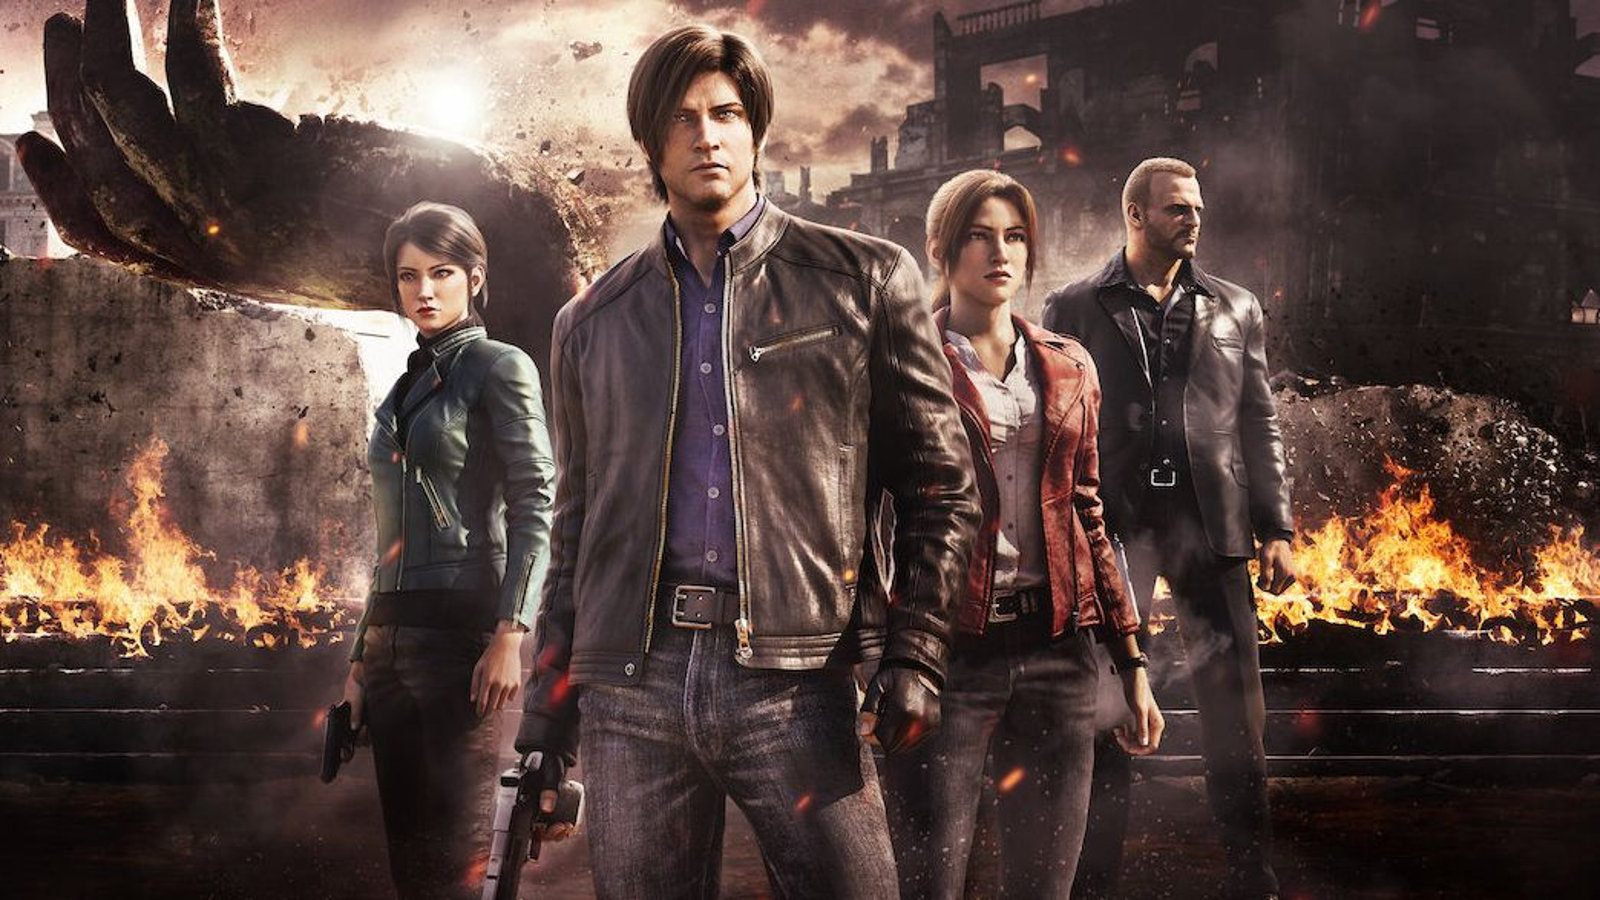 Resident Evil Showrunner Reveals Games Are Canon to the Netflix Series